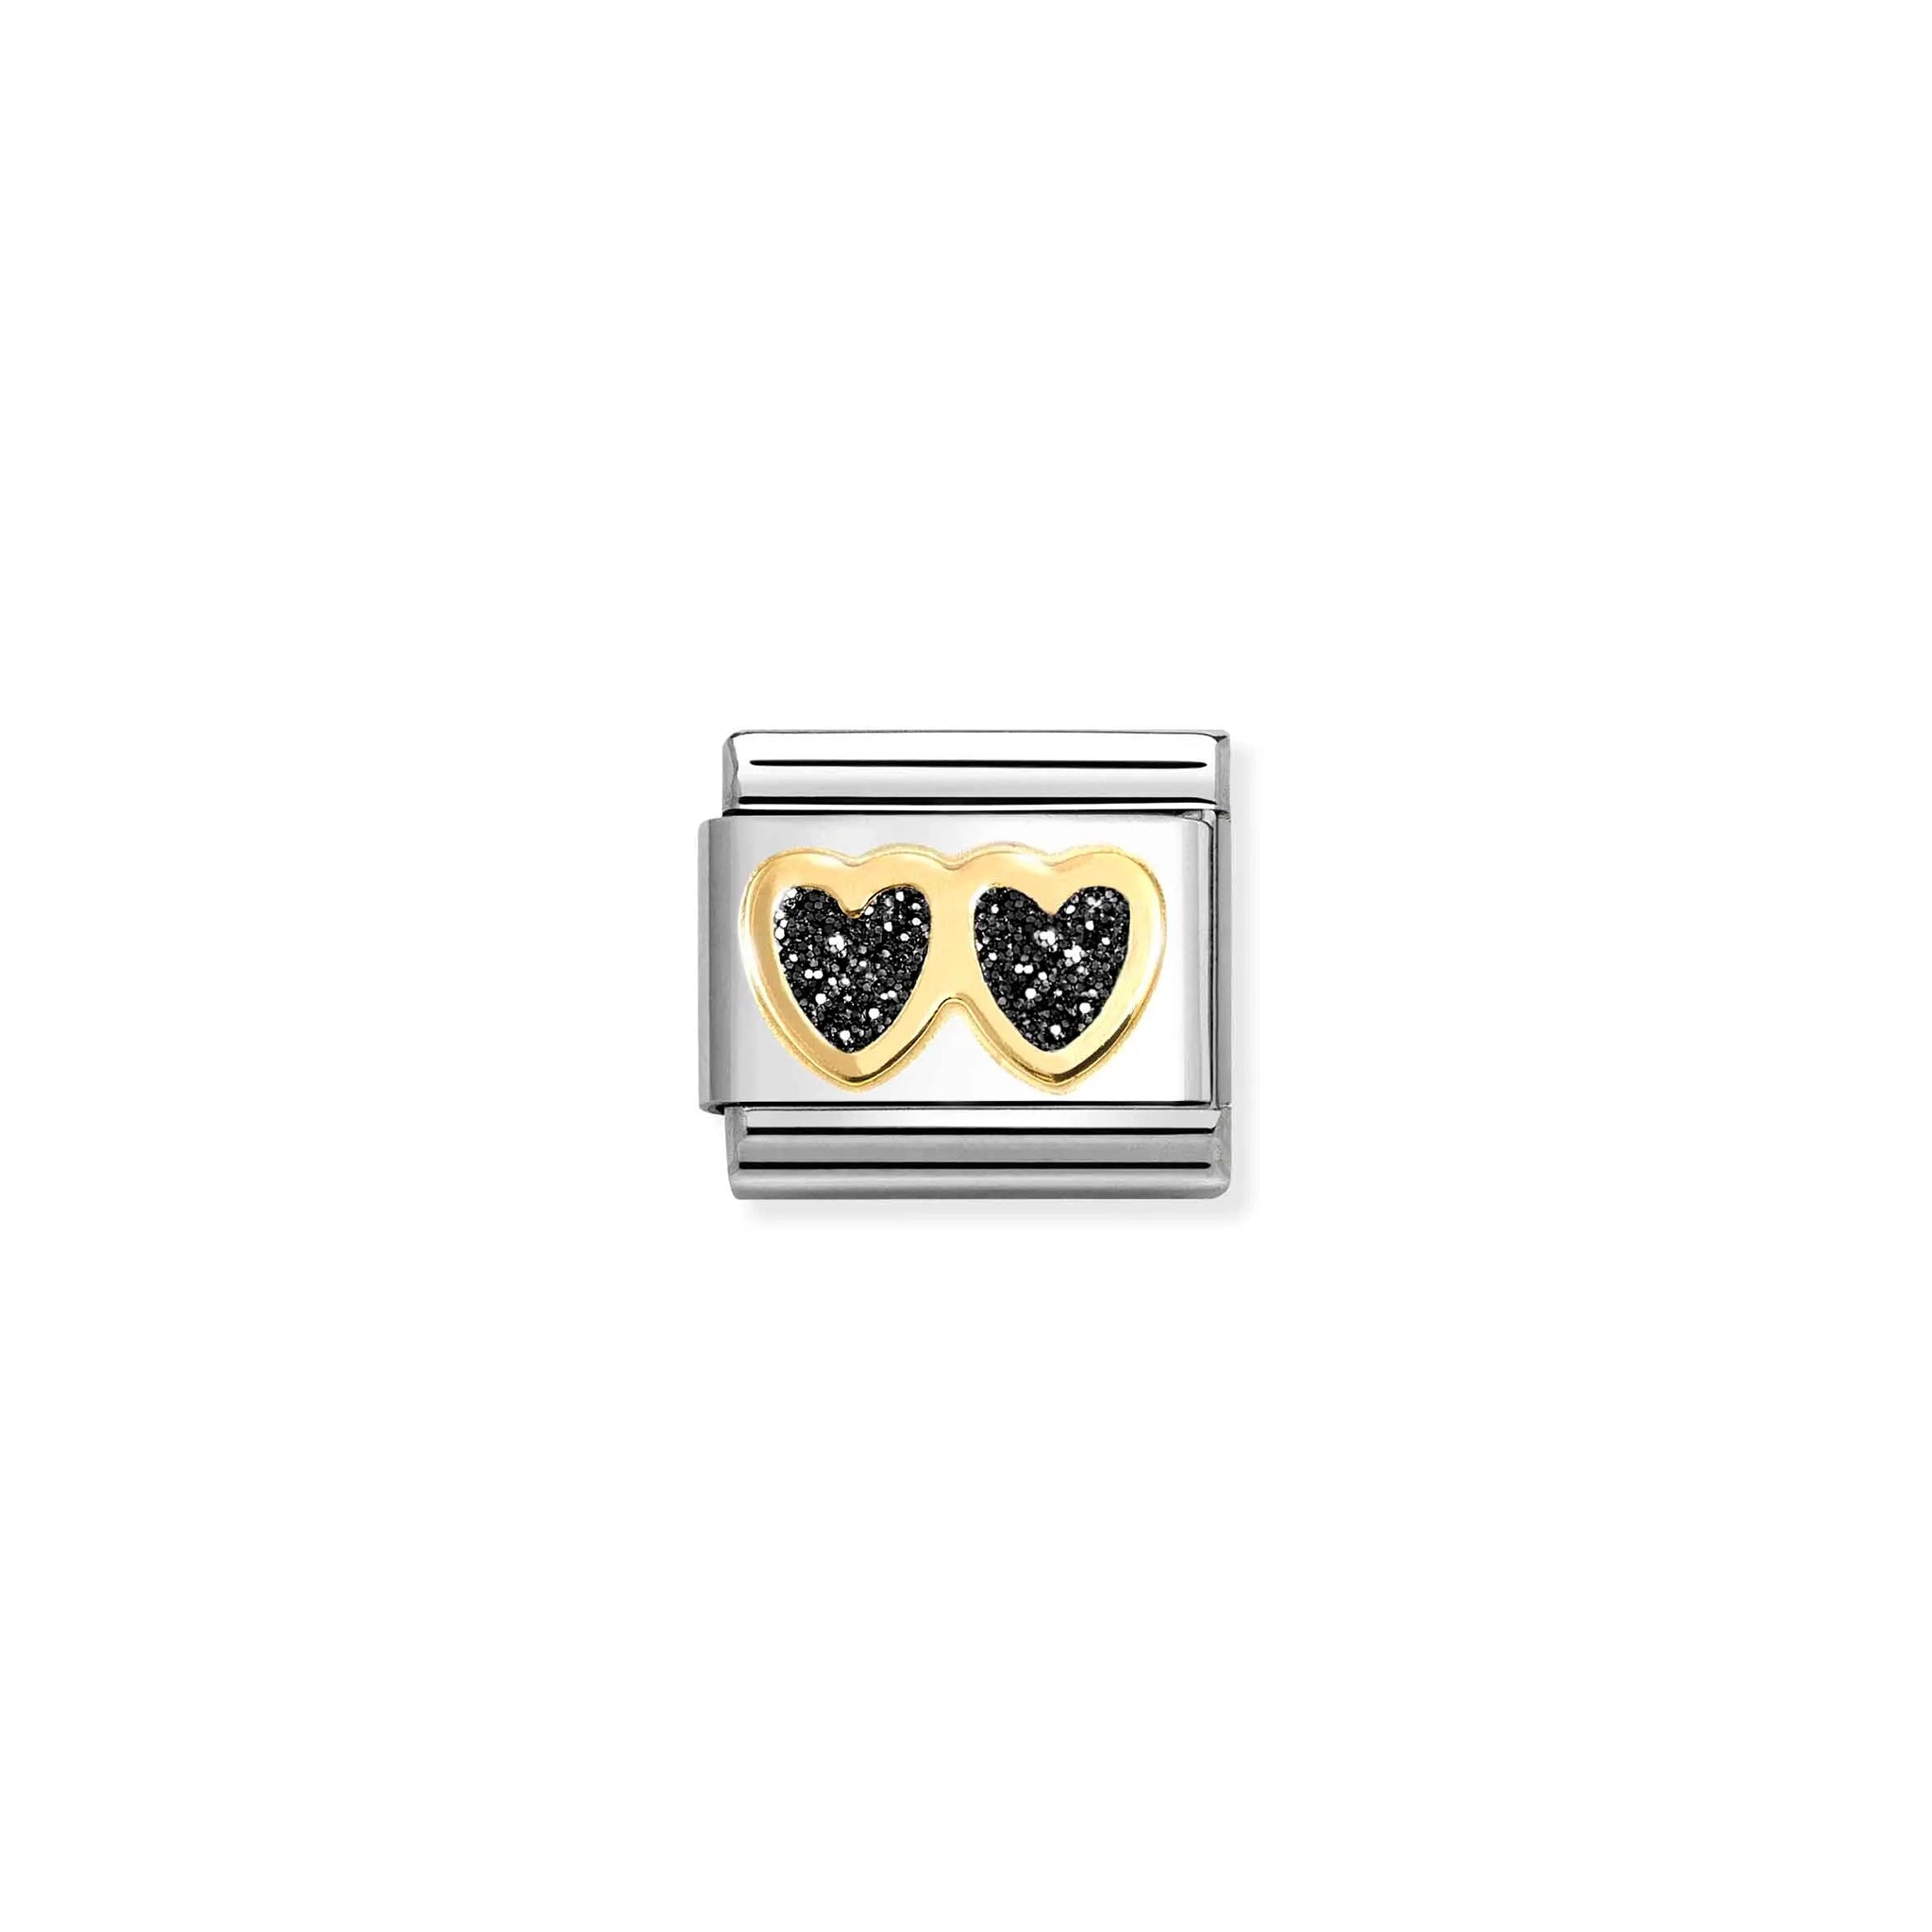 A Nomination link charm featuring gold double hearts in black glitter